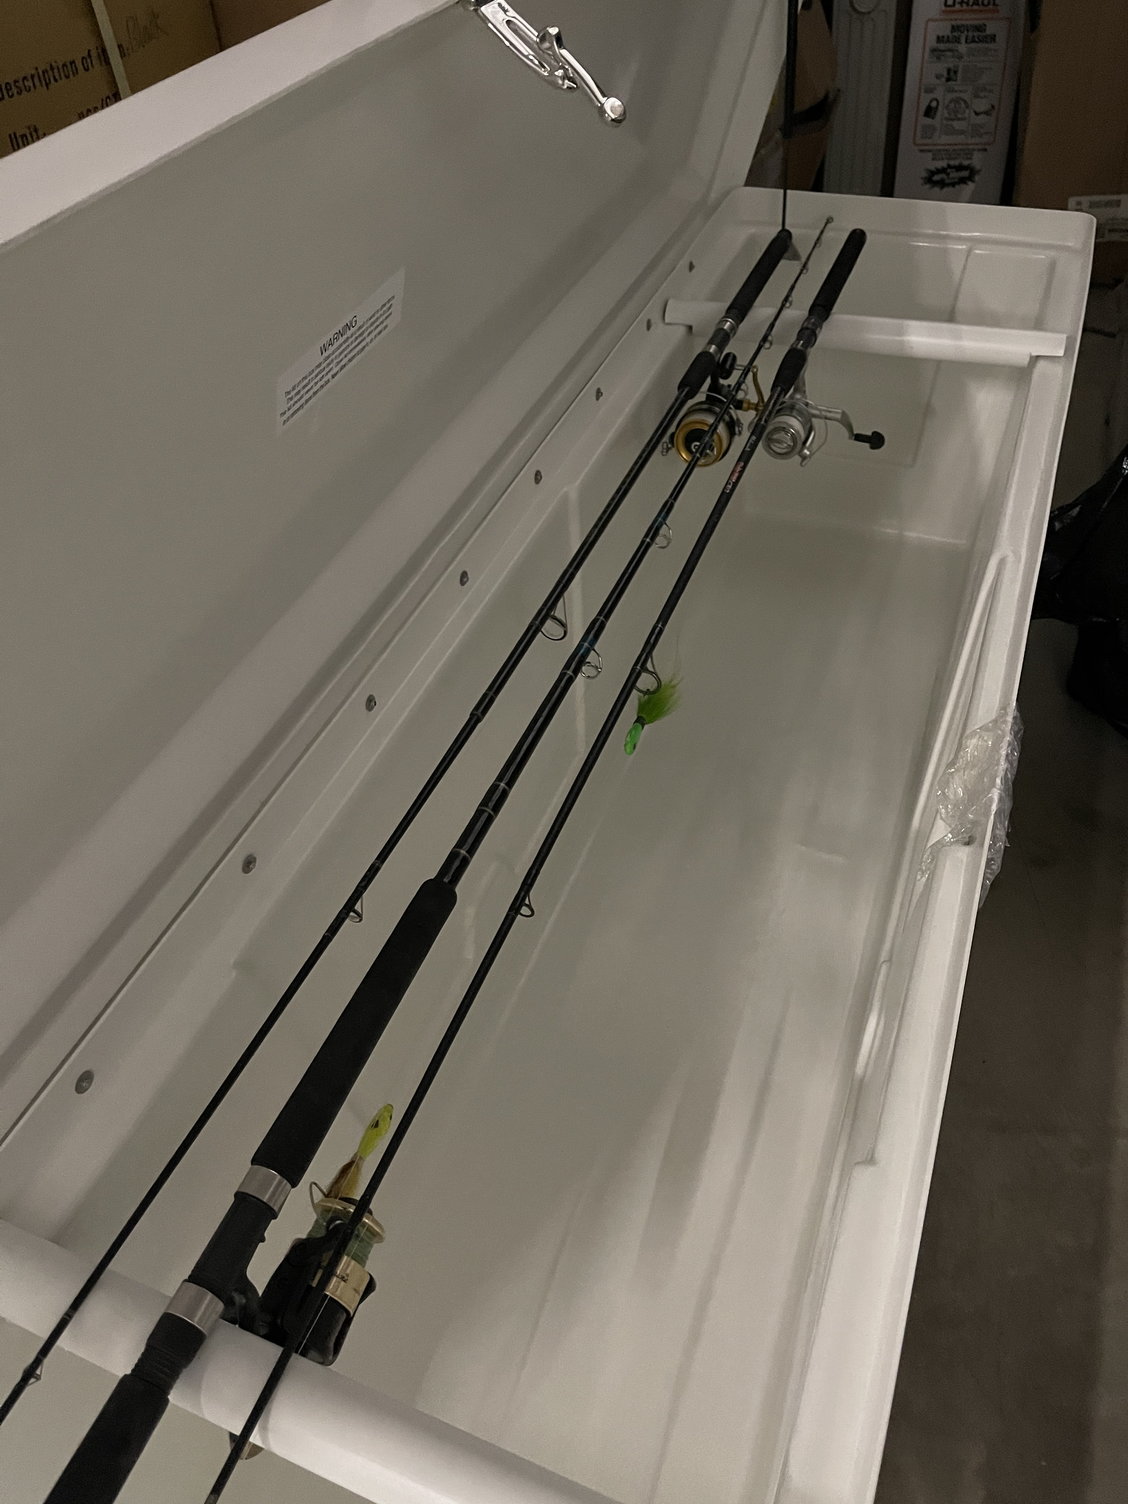 Vertical PVC Rod Storage - The Hull Truth - Boating and Fishing Forum